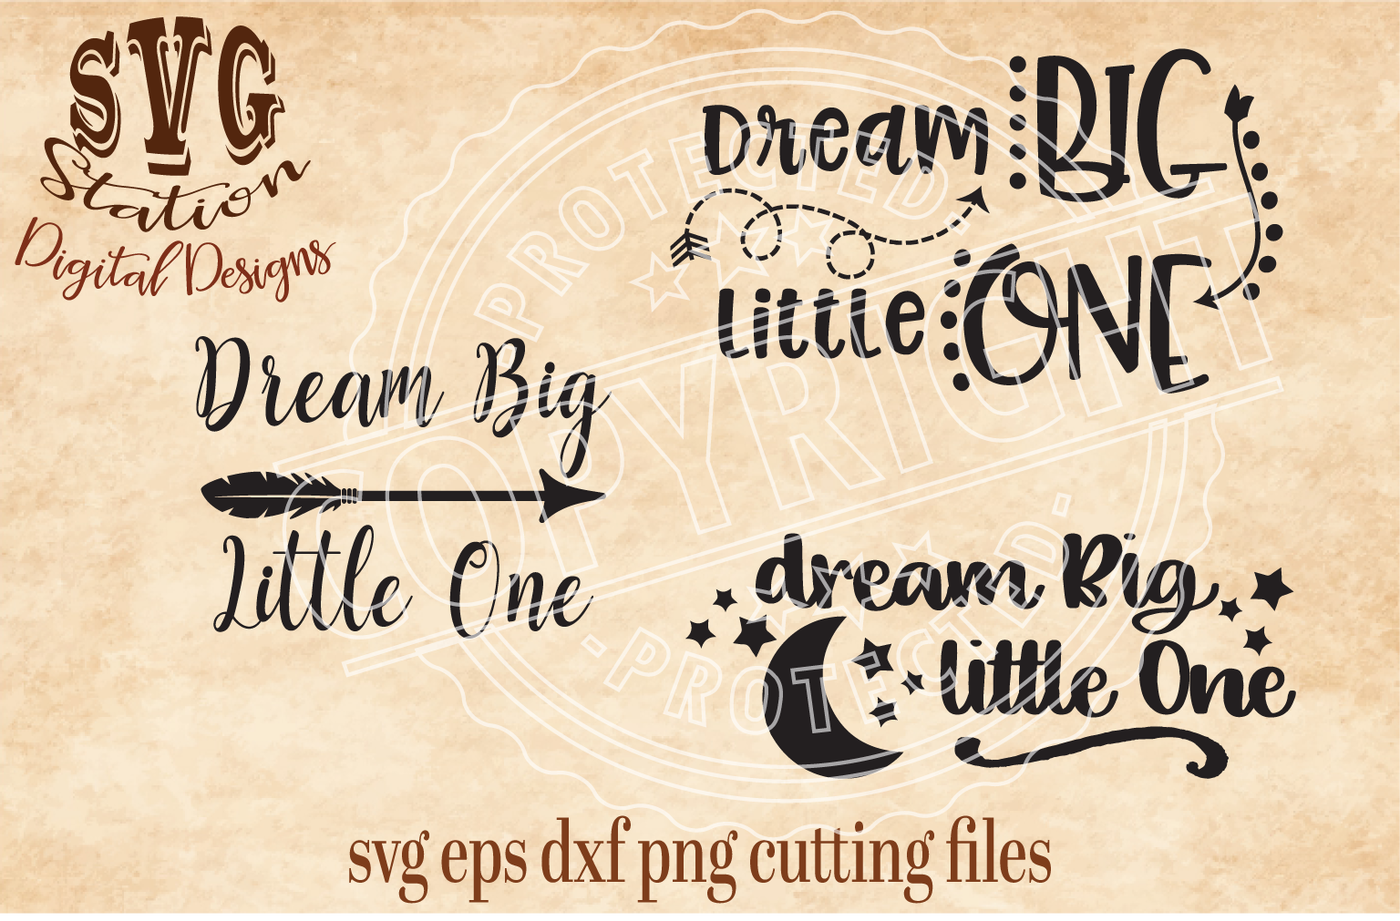 Download Dream Big Little One Svg Dxf Png Eps Cutting File Silhouette Cricut Scal By Svg Station Thehungryjpeg Com